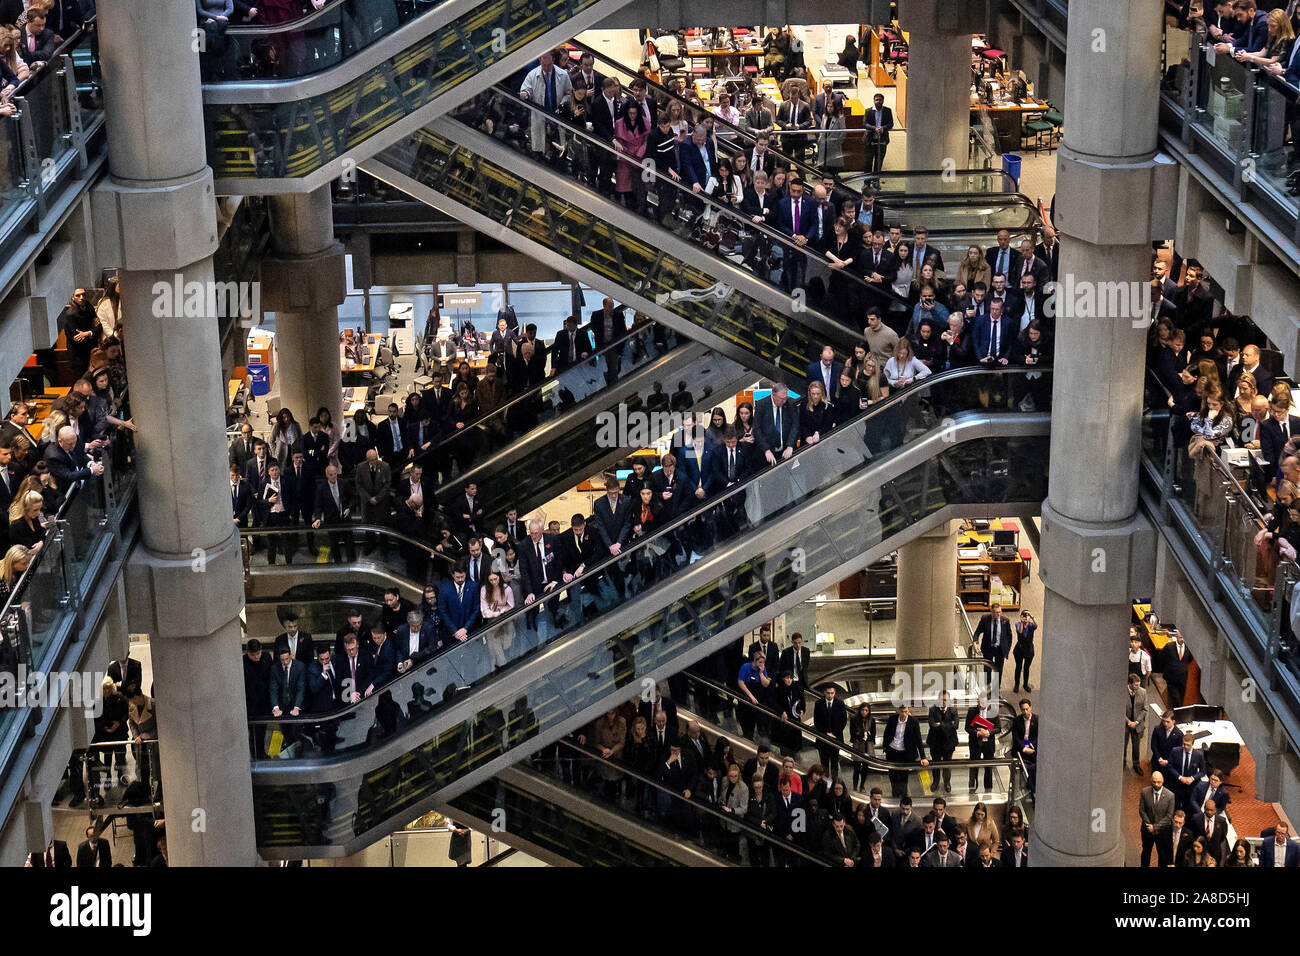 City workers at a Remembrance Day ceremony at Lloyd's of London in the City of London to mark Armistice Day, the anniversary of the end of the First World War. Stock Photo